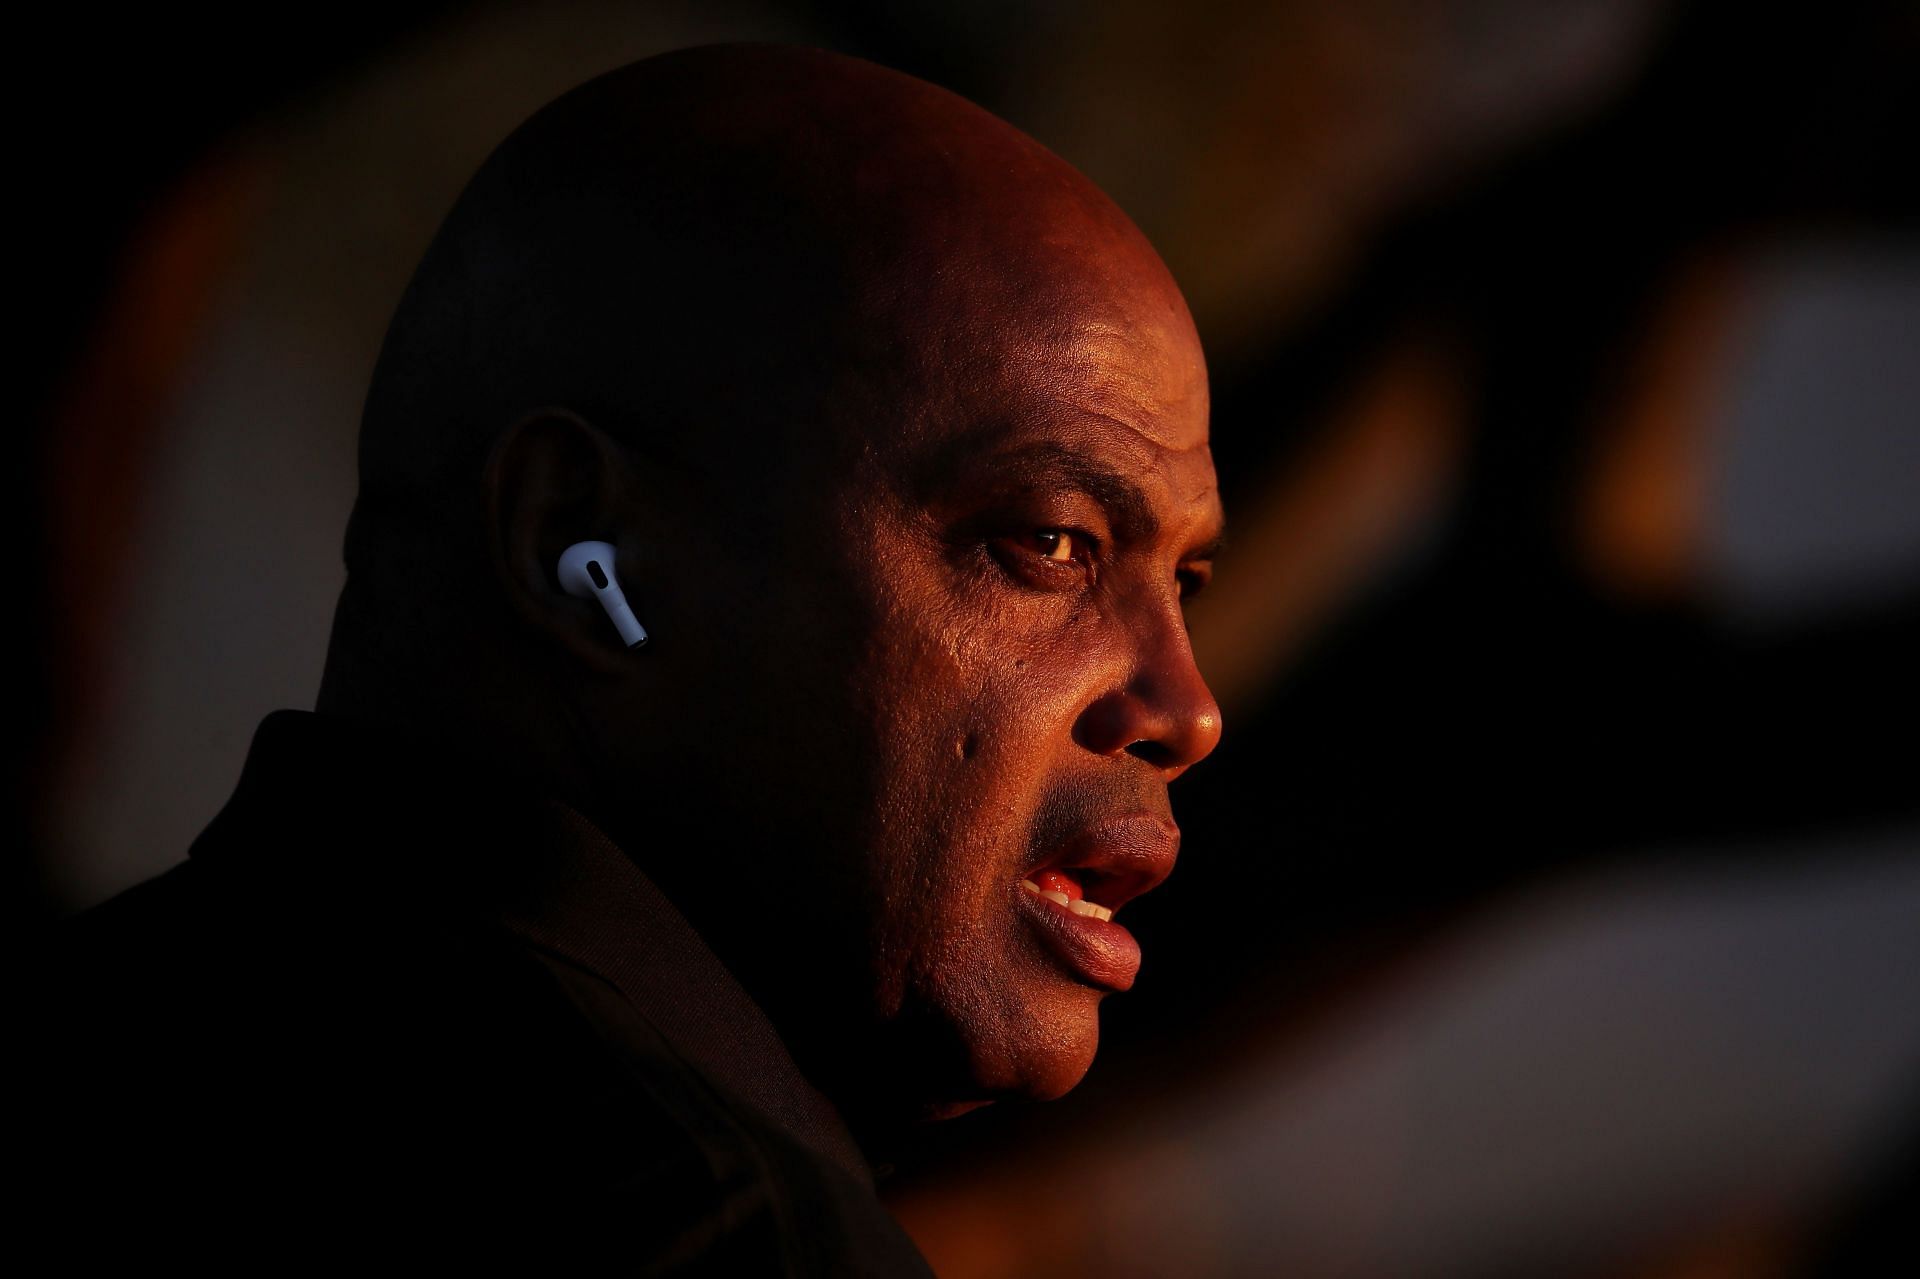 Charles Barkley believes that pay disparity in name, image and likeness deals could lead to problems.